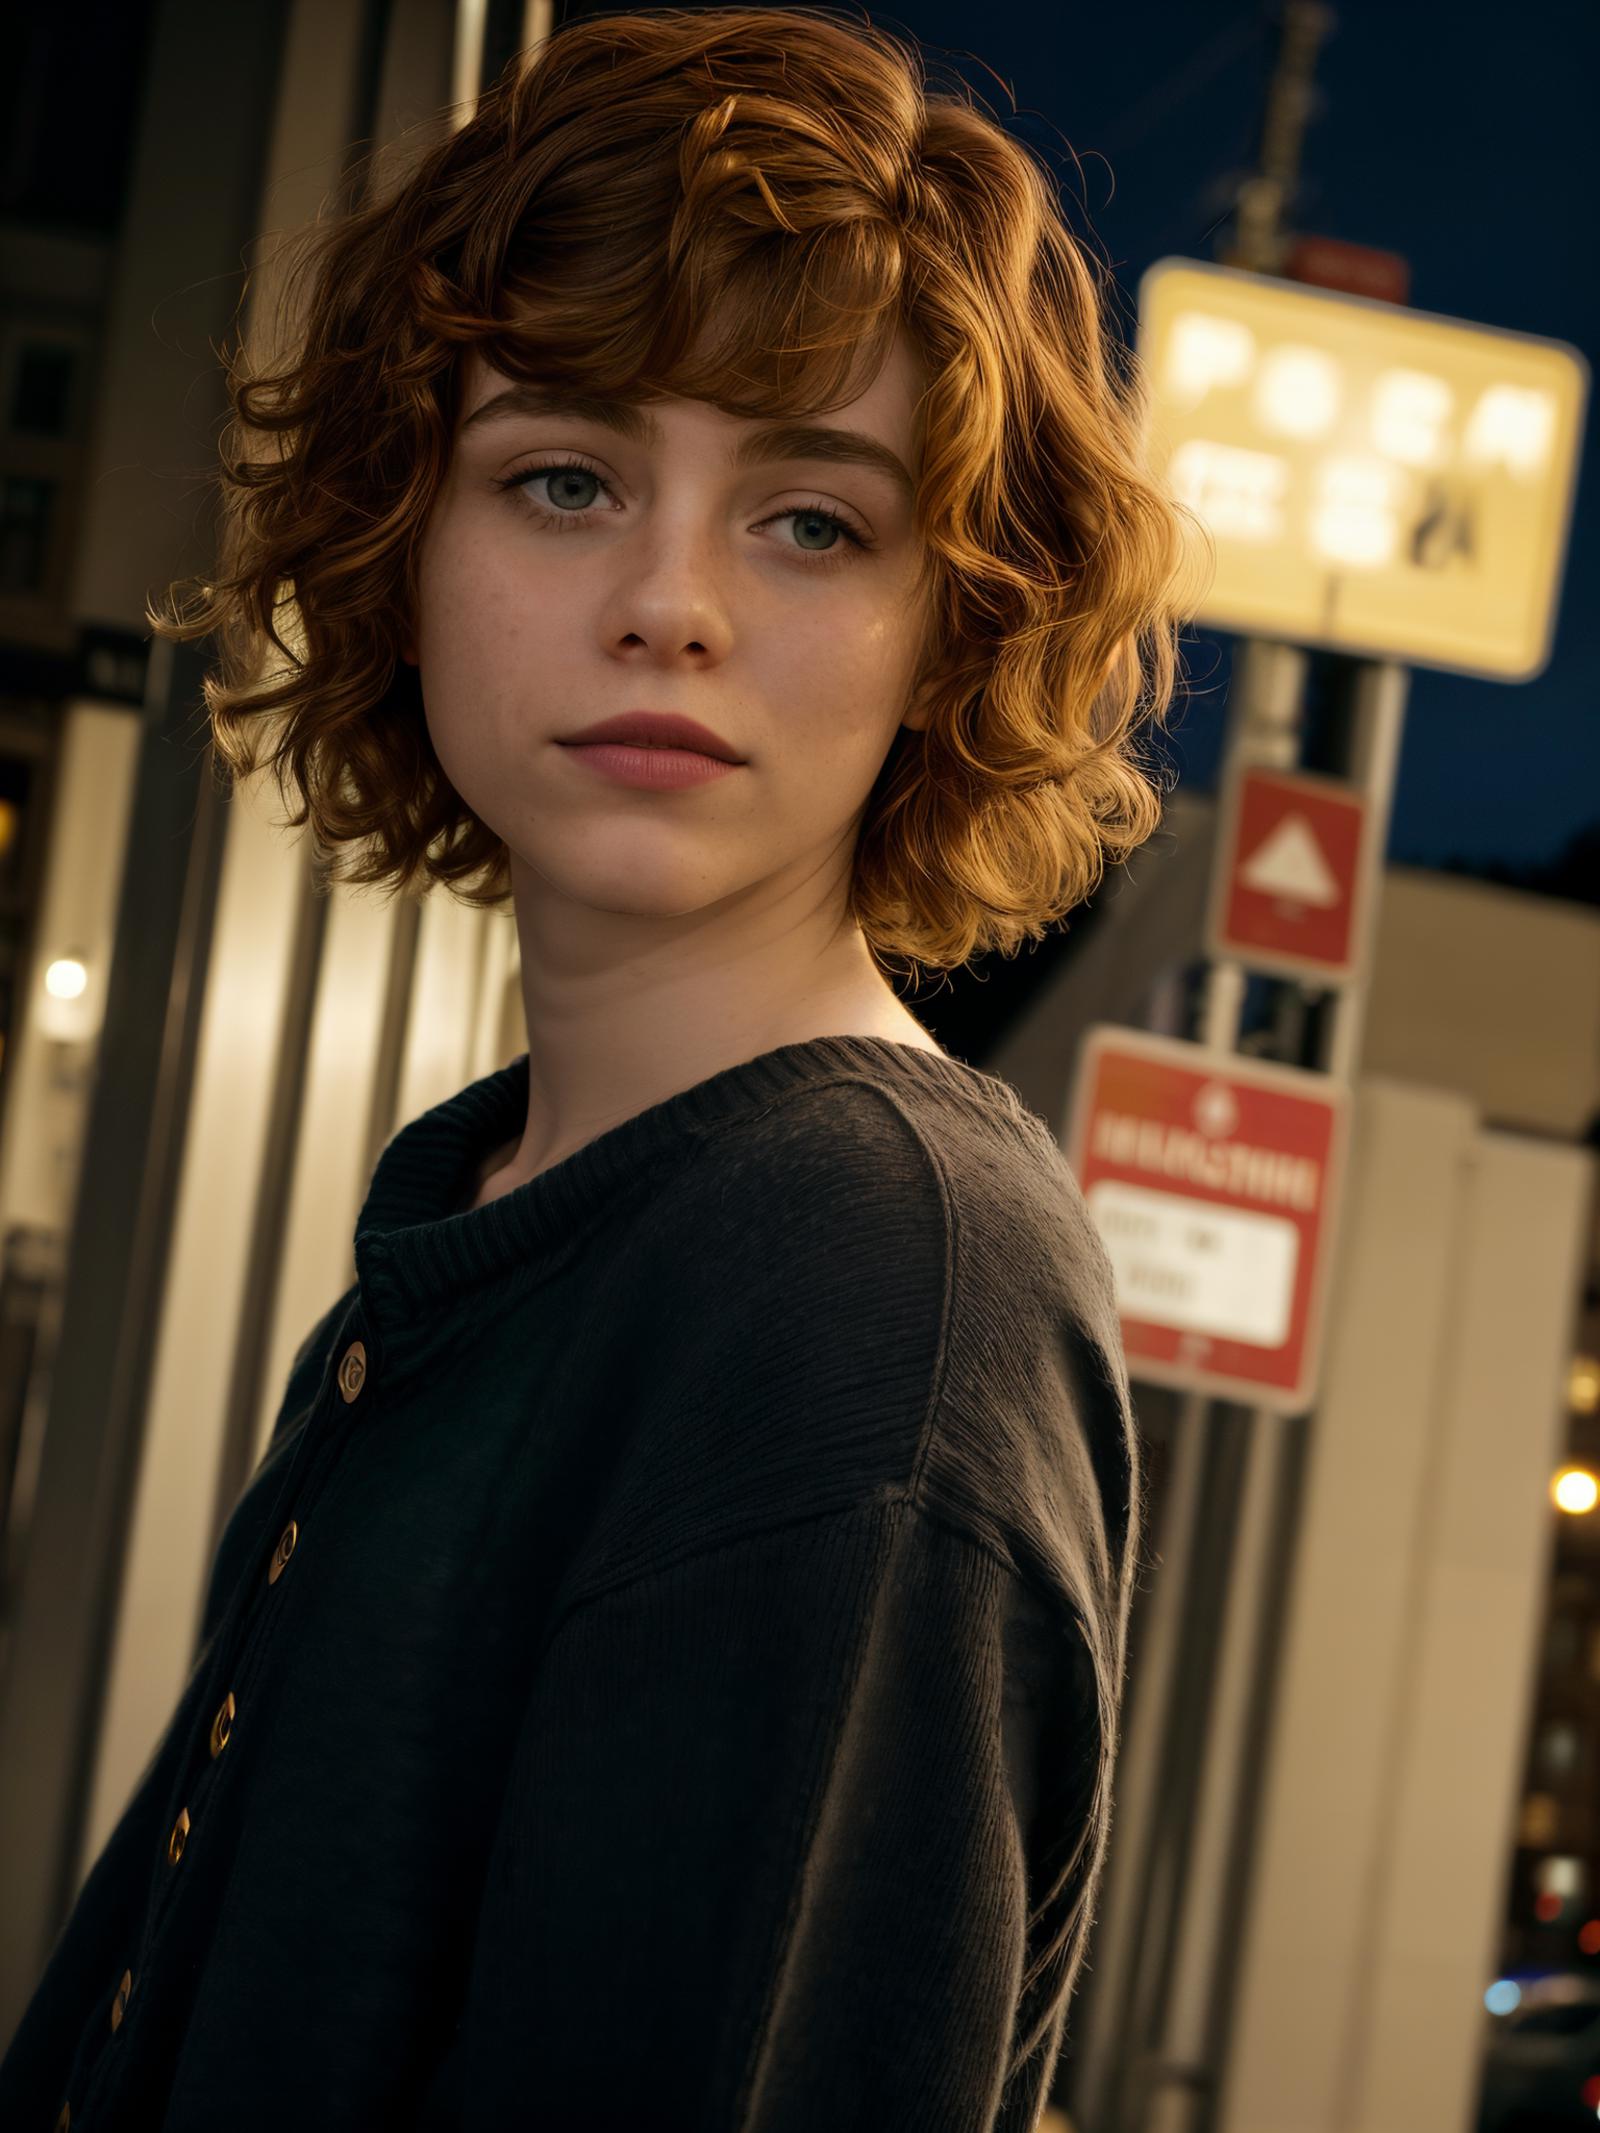 Sophia Lillis / Doric from Dungeons and Dragons image by damocles_aaa